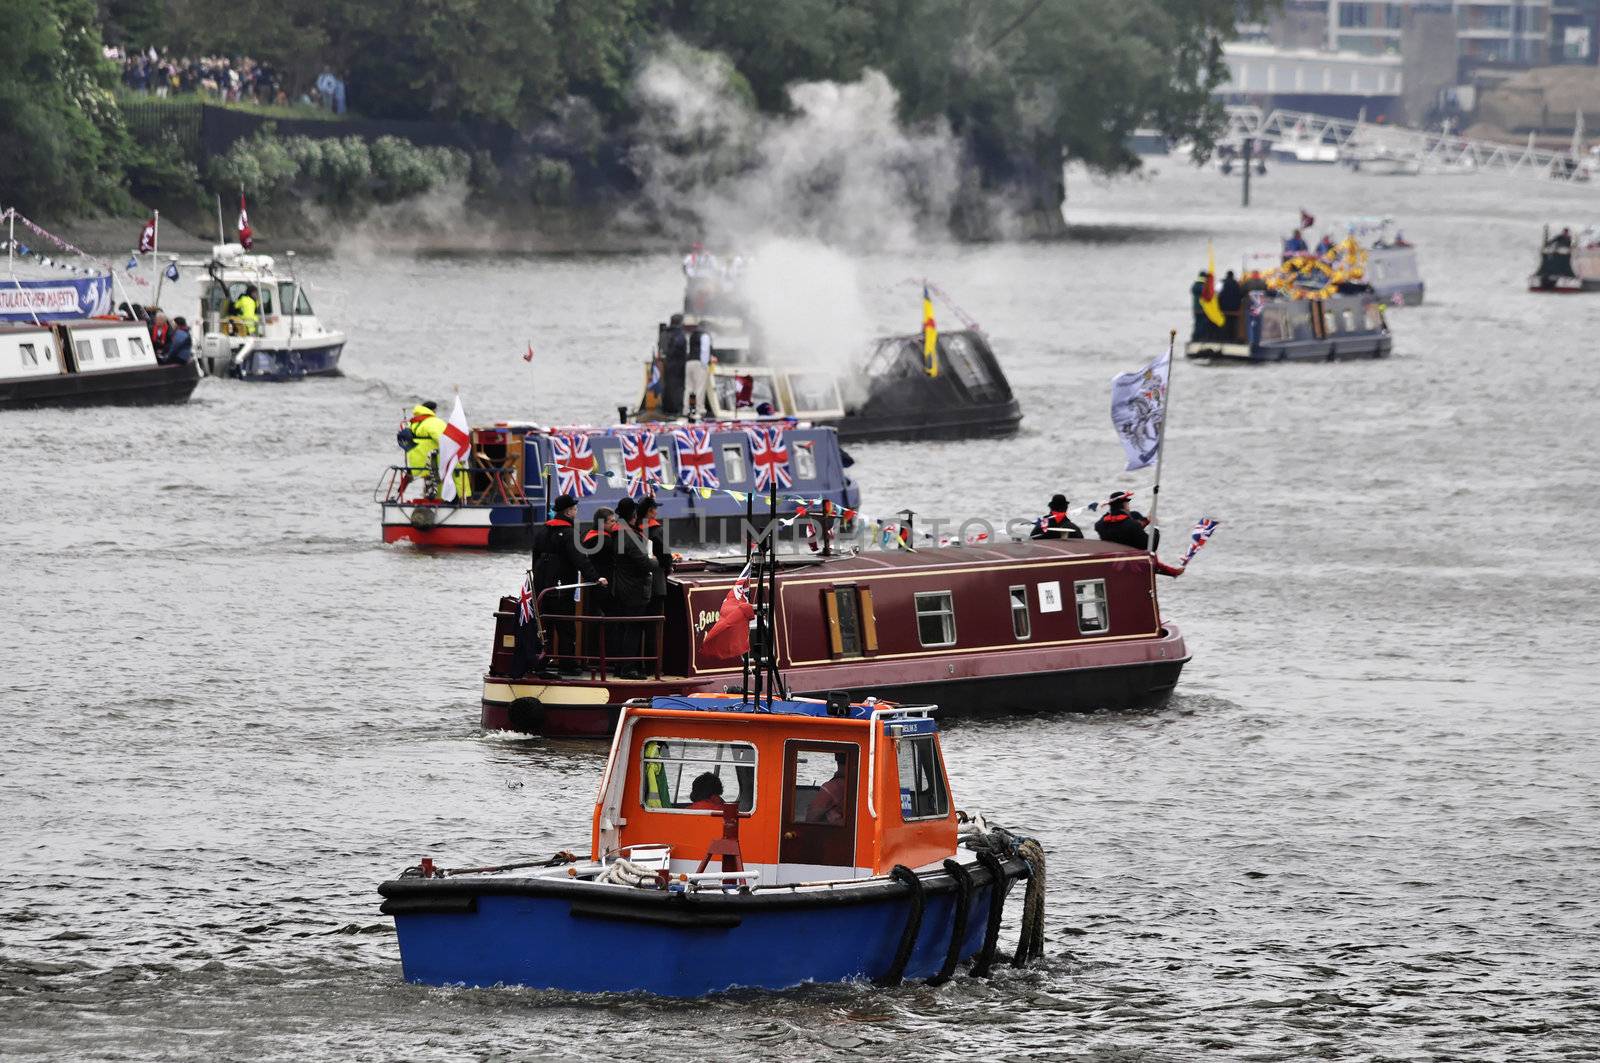 The Thames Diamond Jubilee Pageant by dutourdumonde